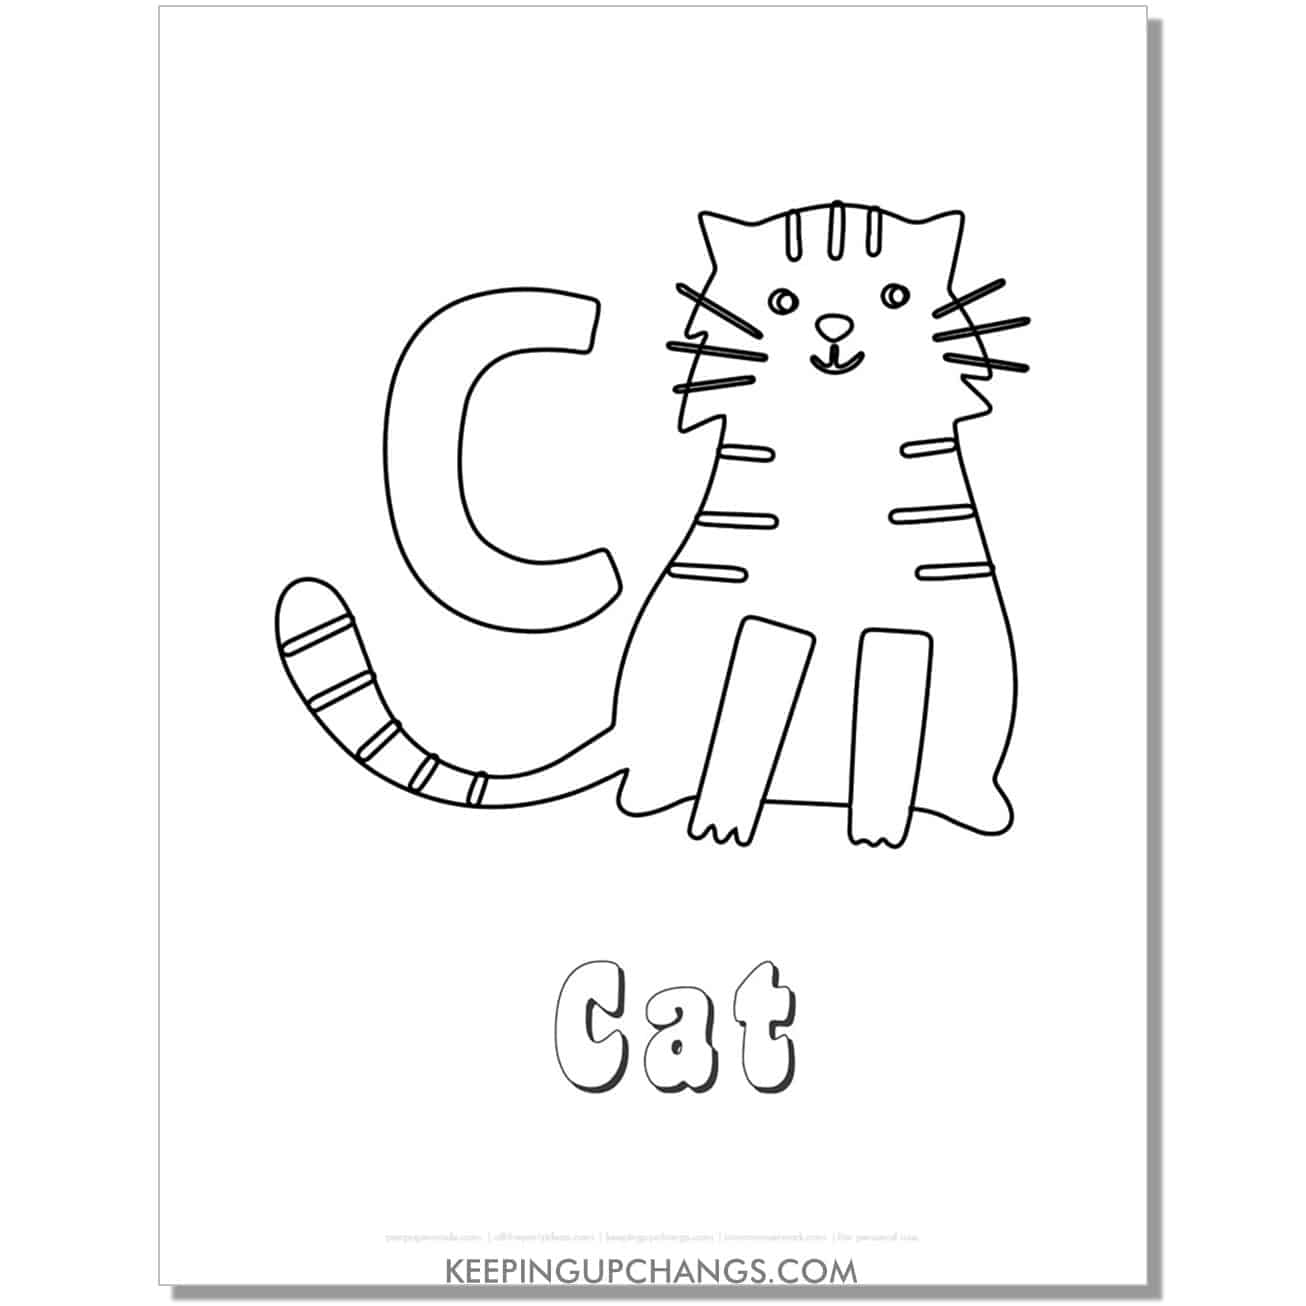 fun abc c coloring page with cat hand drawing.